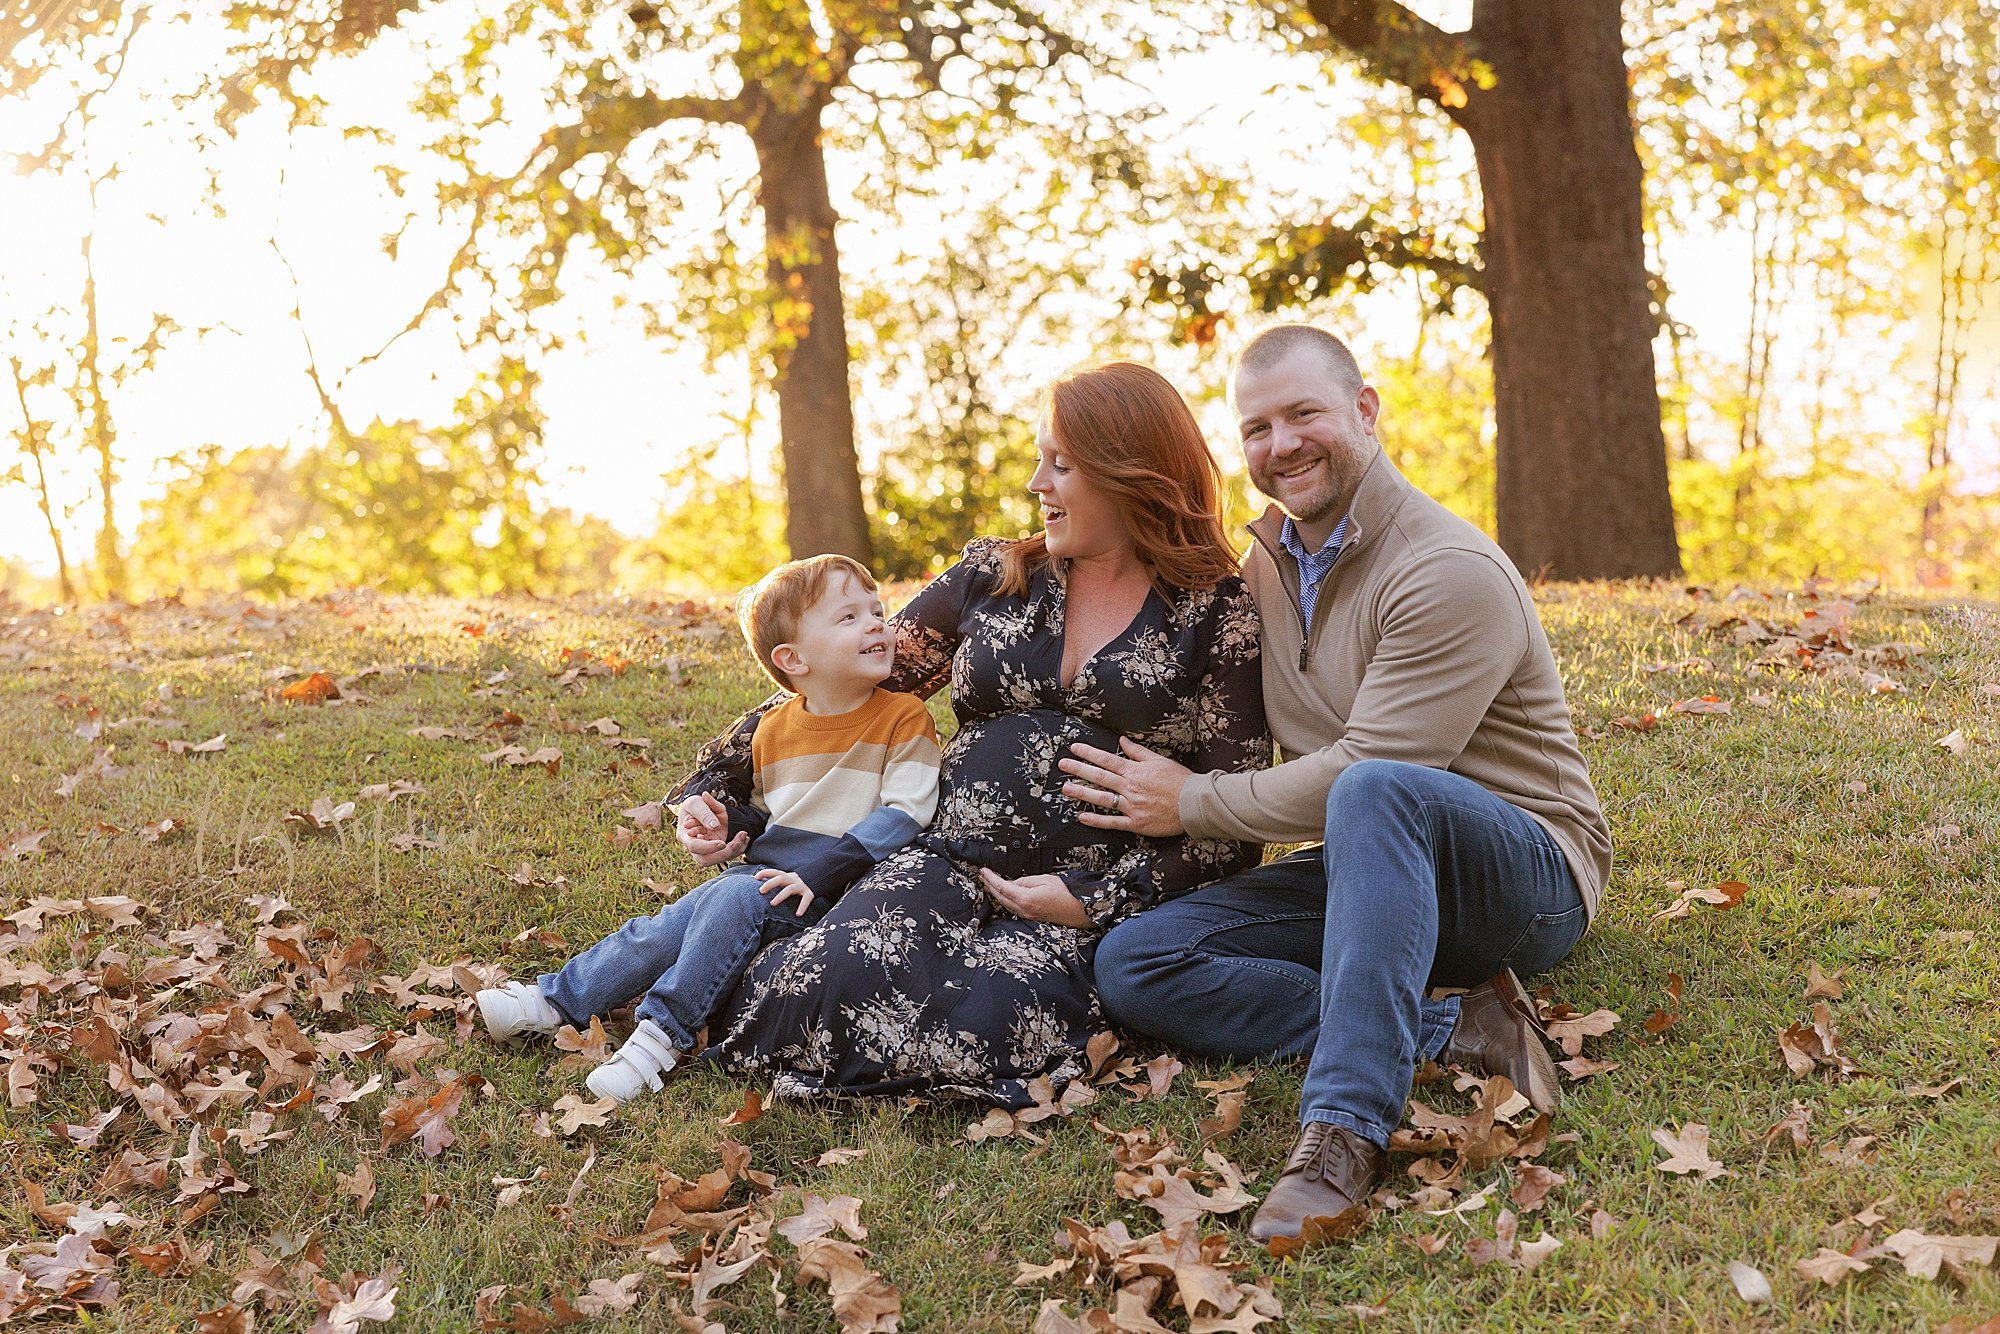 intown-atlanta-decatur-brookhaven-buckhead-outdoor-fall-pictures-family-maternity-photoshoot_5574.jpg